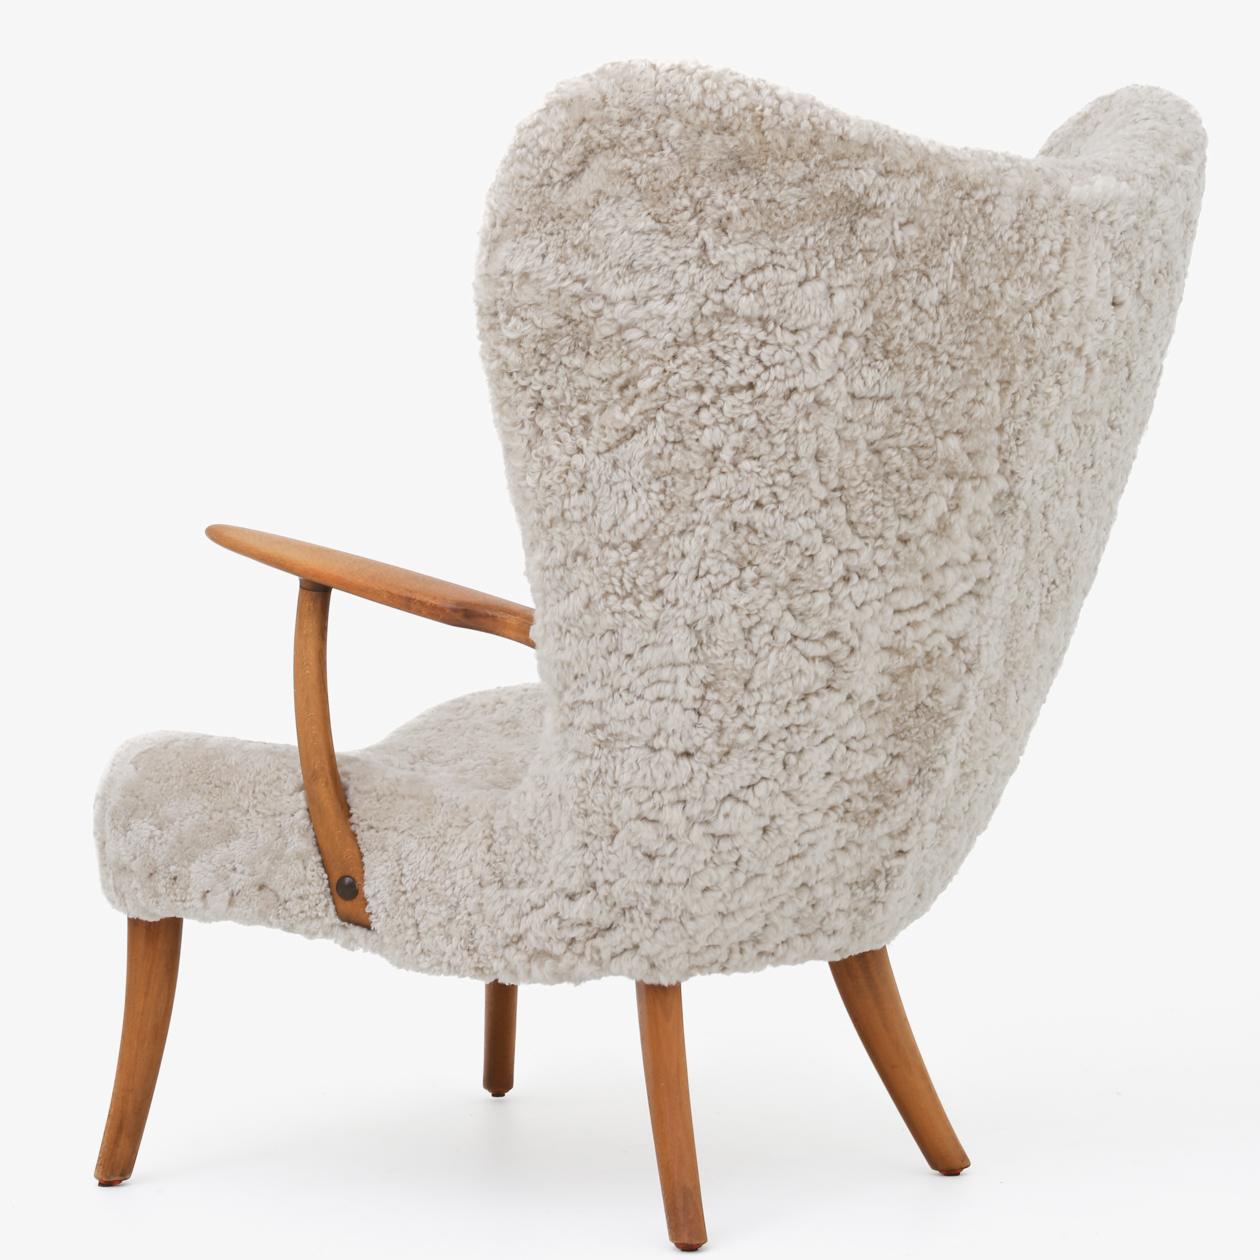 Model 'Pragh' - Reupholstered lounge chair in 'Moonlight' lambswool with patinated beech frame. Designed in 1954. Arnold Madsen & Henry Schubell.